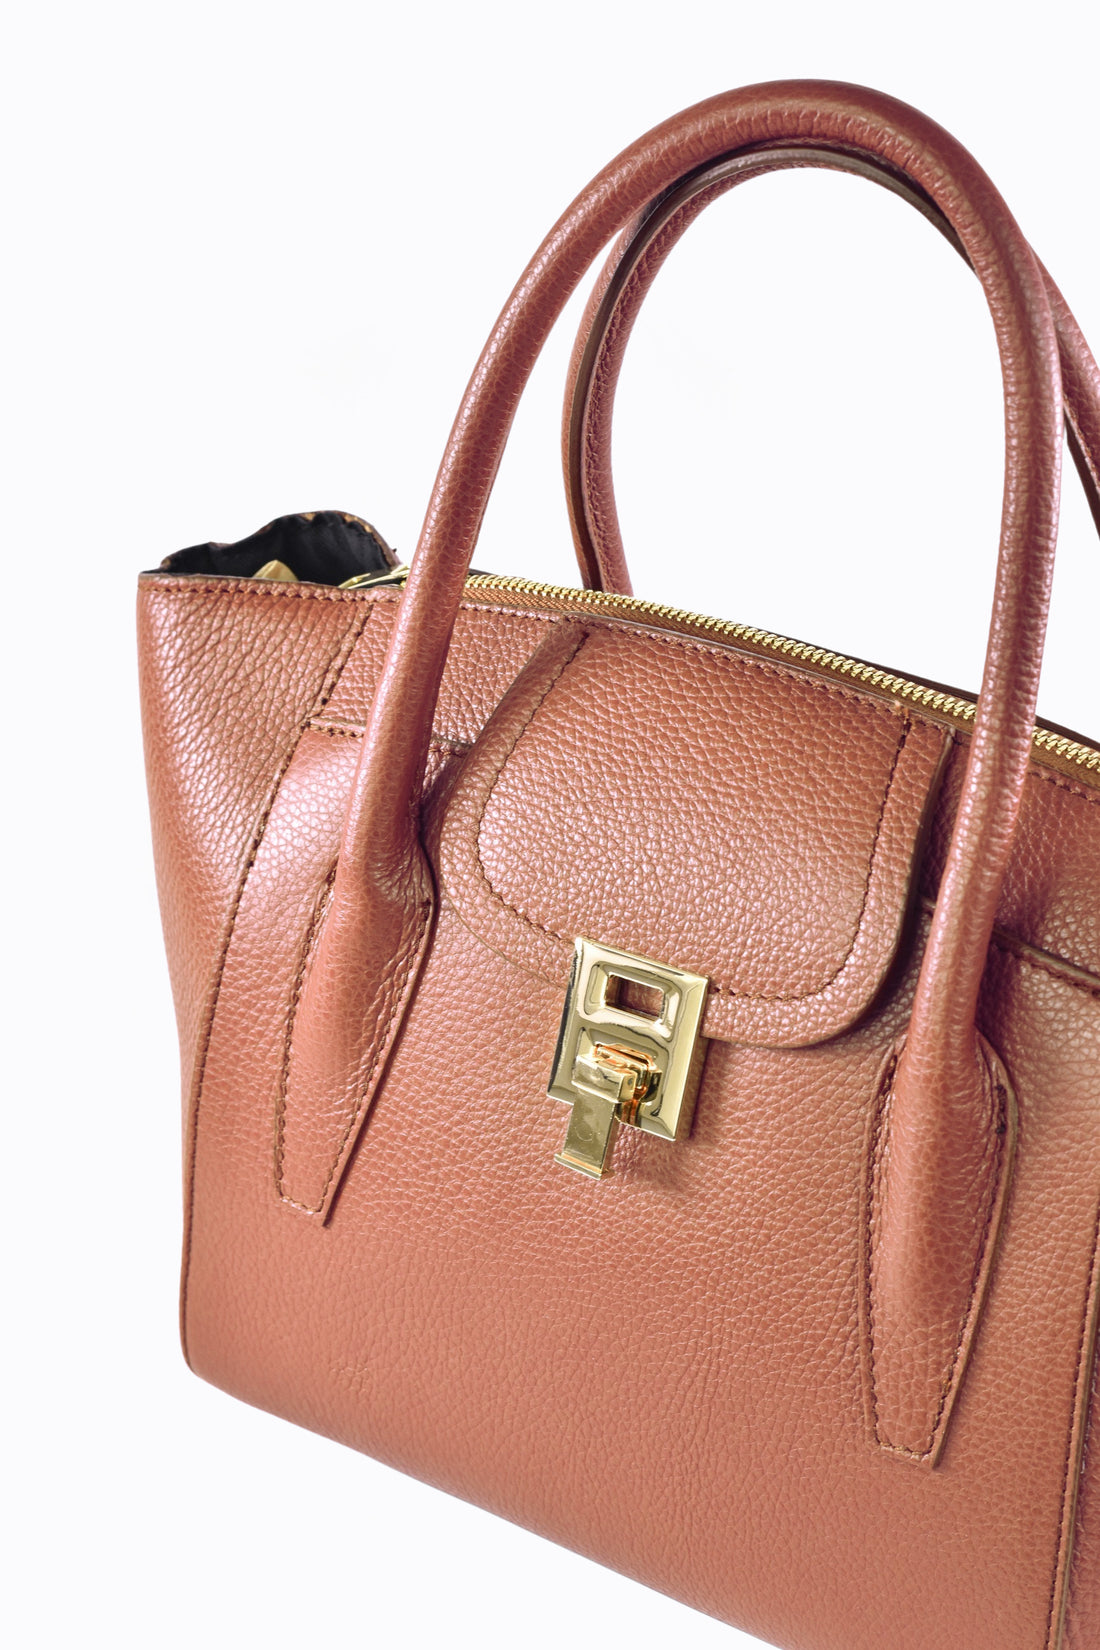 Kylie bag in Dollar Cuoio leather